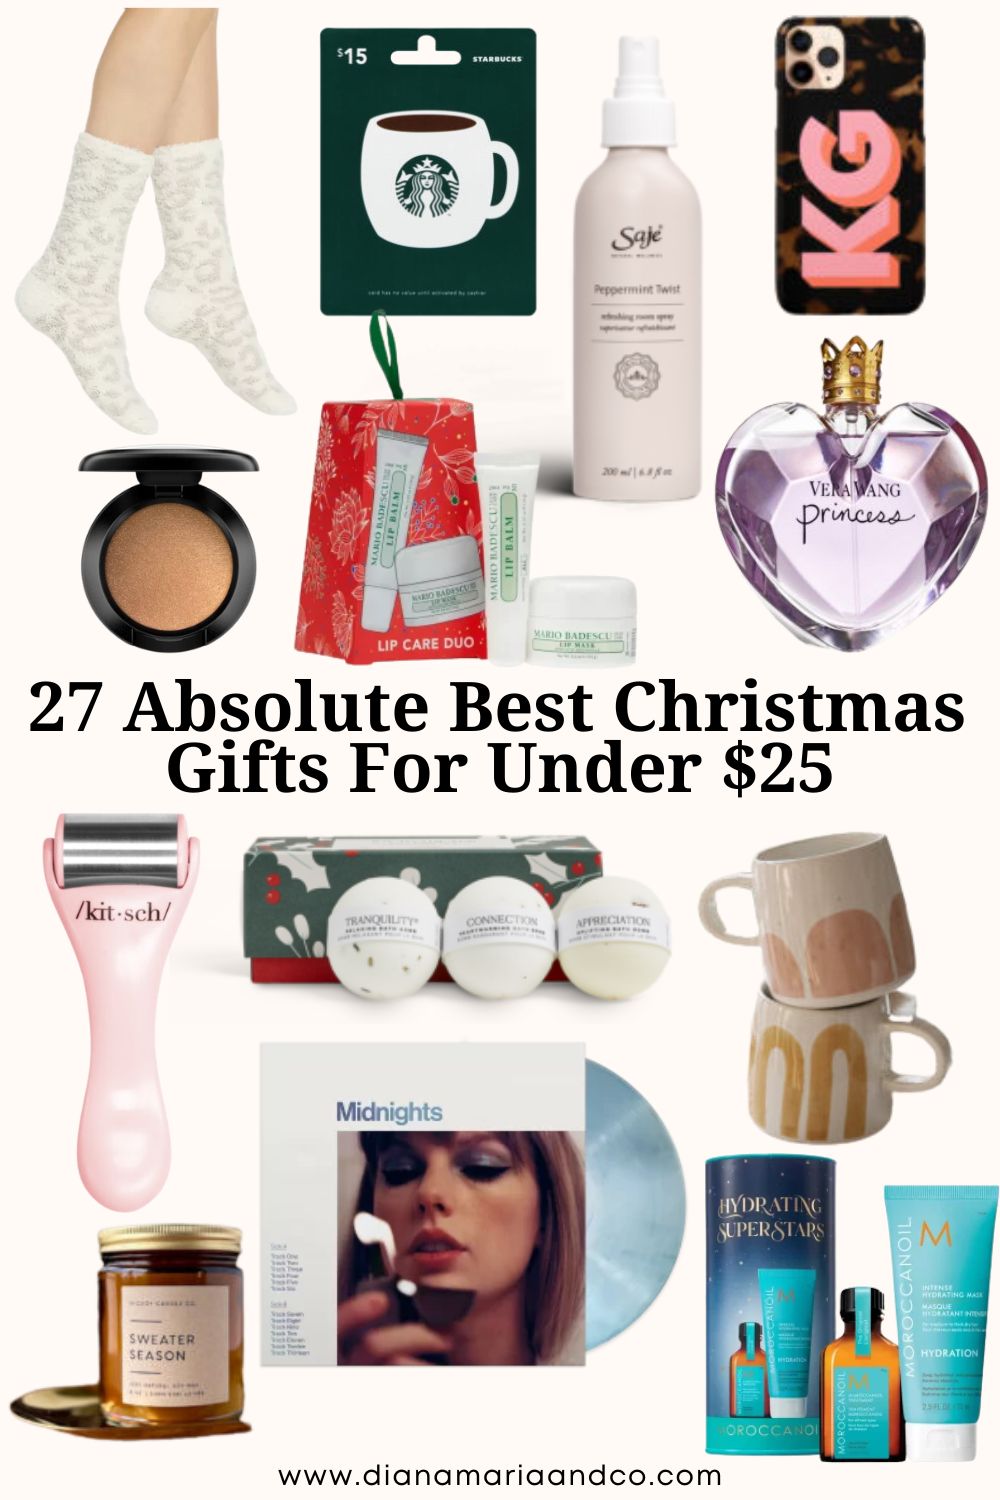 Last Minute Gifts Under $25 + a very helpful Gift Finder Tool - M Loves M